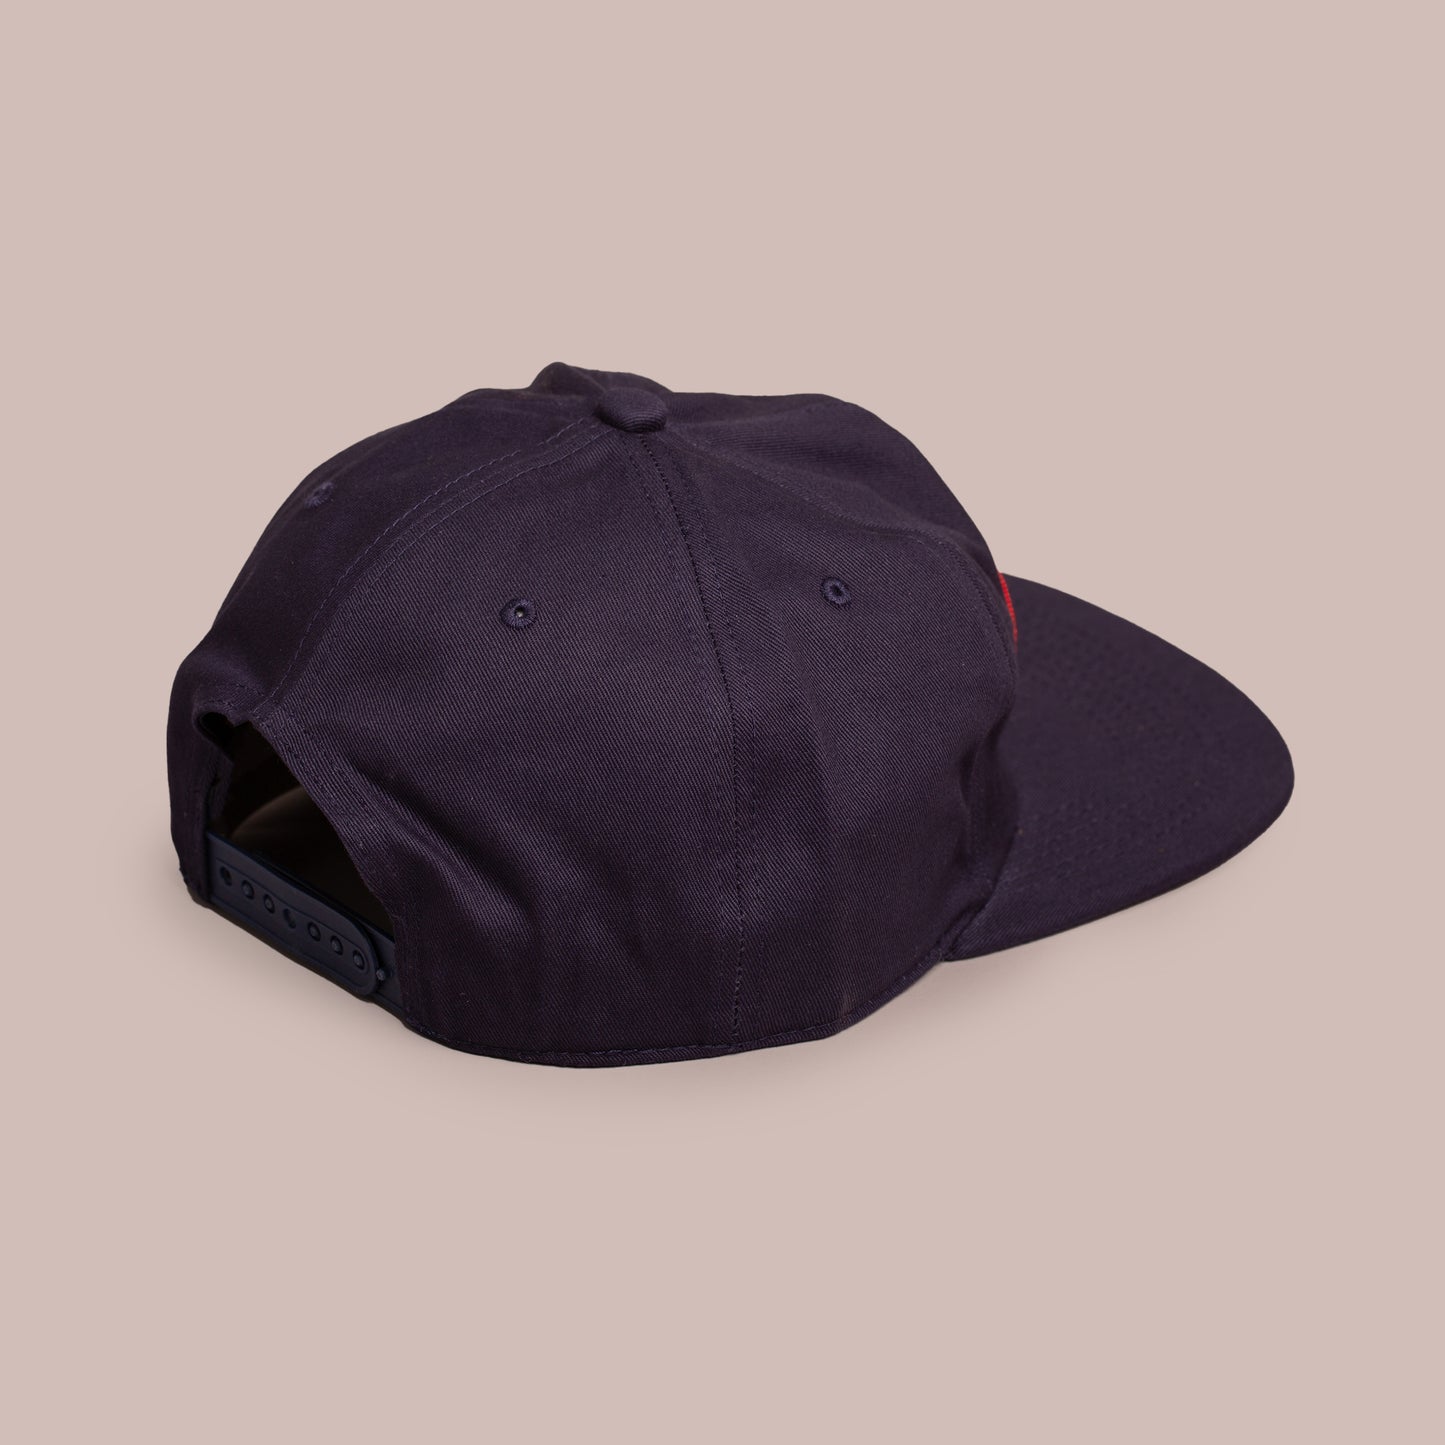 Red Ball Service Unstructured Cap